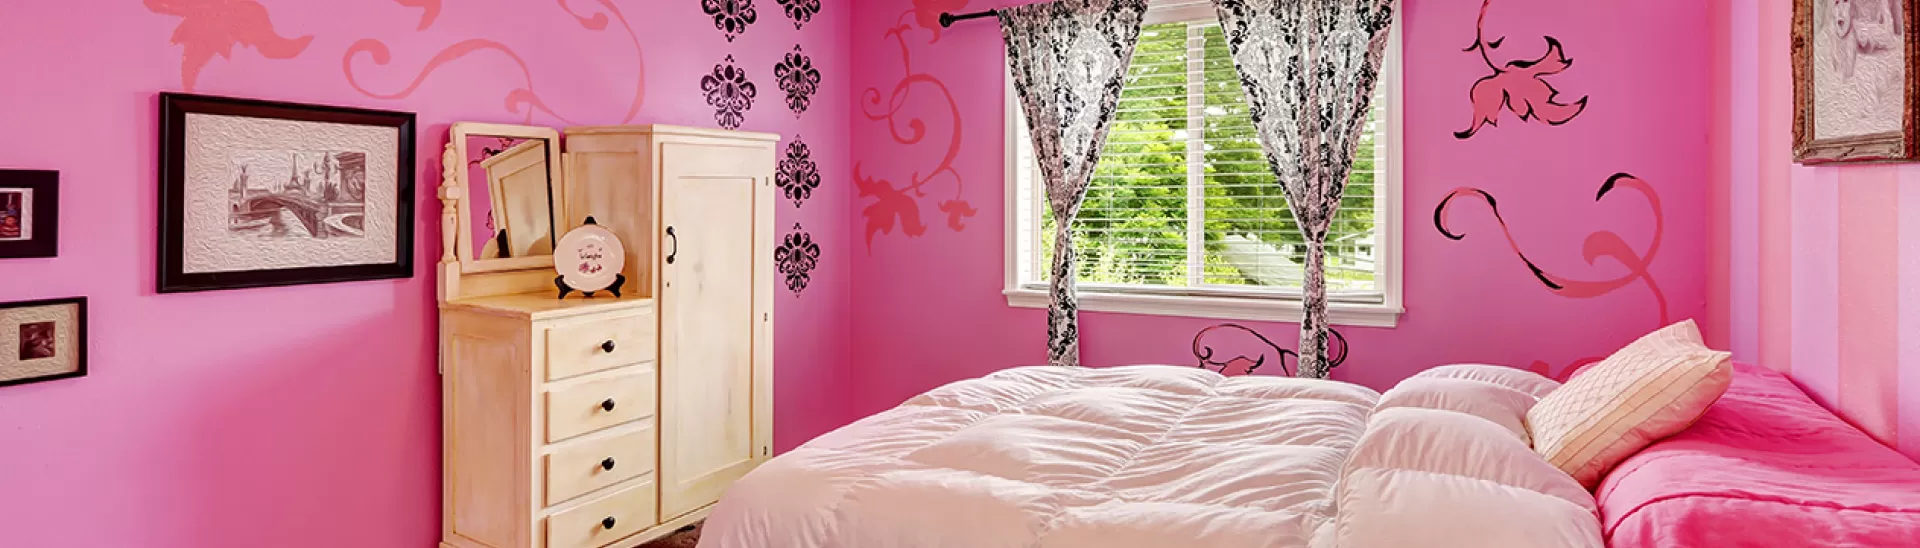 Bedroom Wall Colour Combinations for your Home - Asian Paints